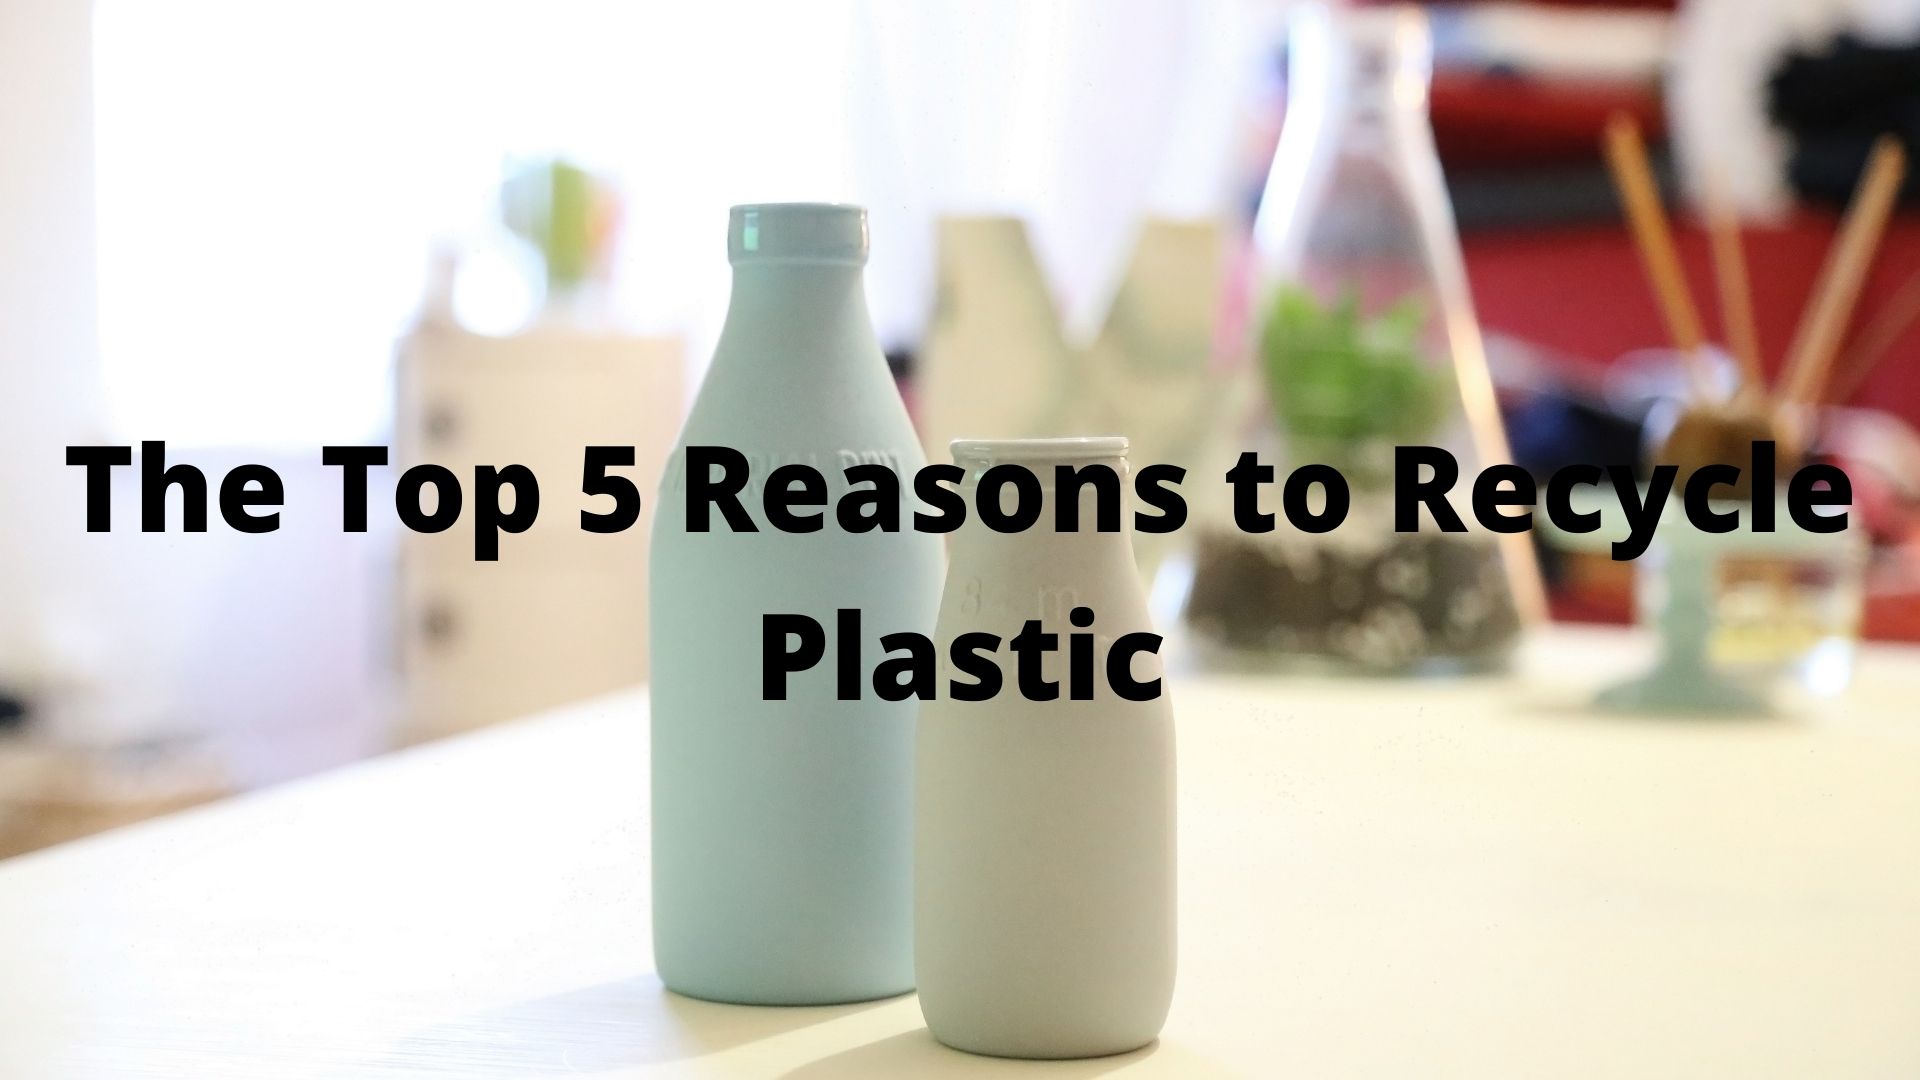 The Top 5 Reasons to Recycle Plastic